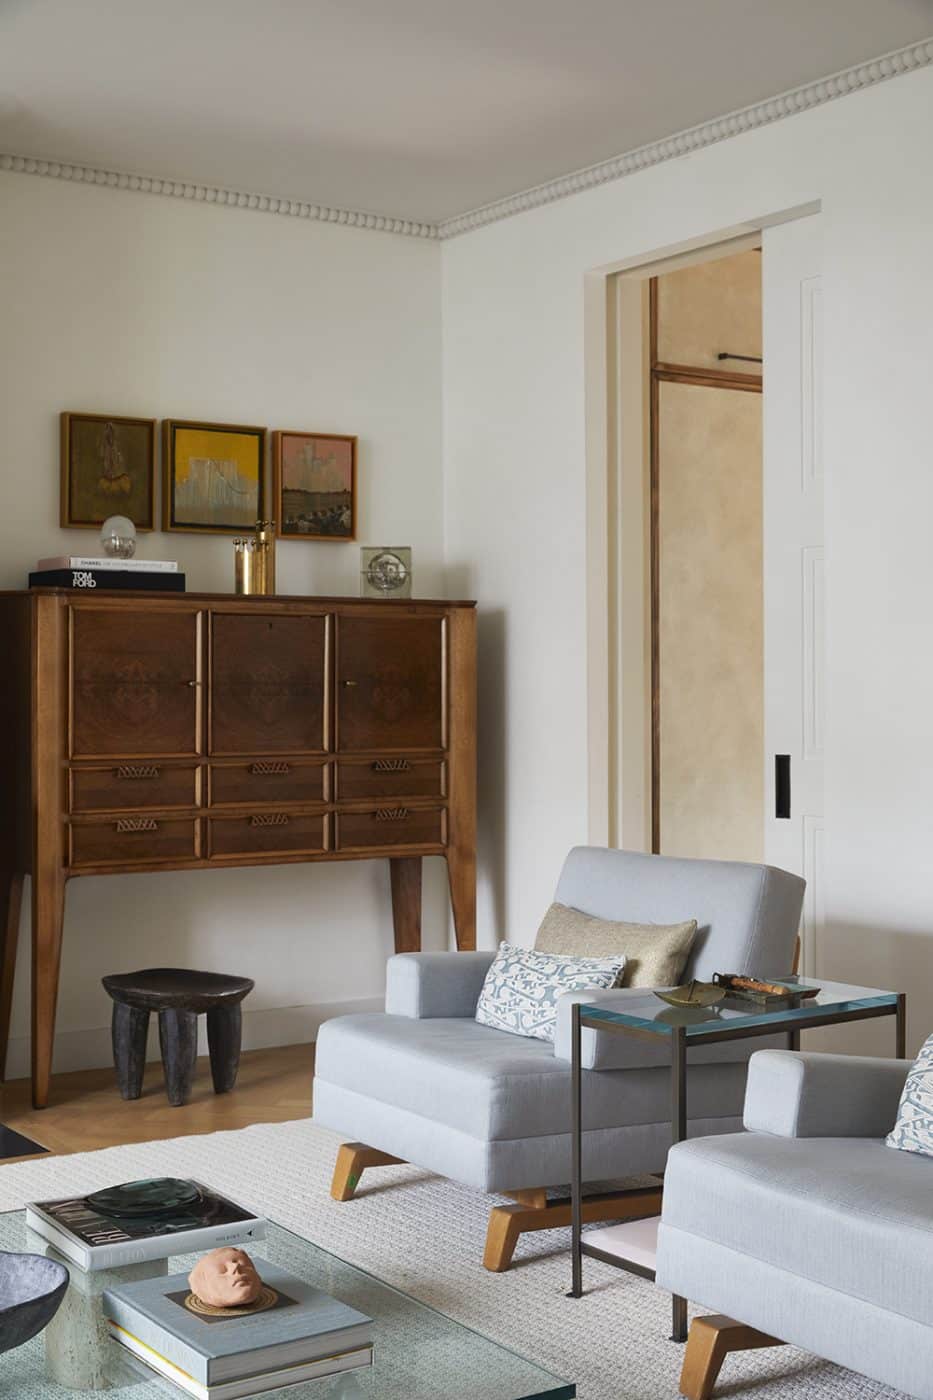 Living room of townhouse in London's Chelsea neighborhood designed by Bryan O'Sullivan featuring Paolo Buffa cabinet, carved wood Ethiopian stool